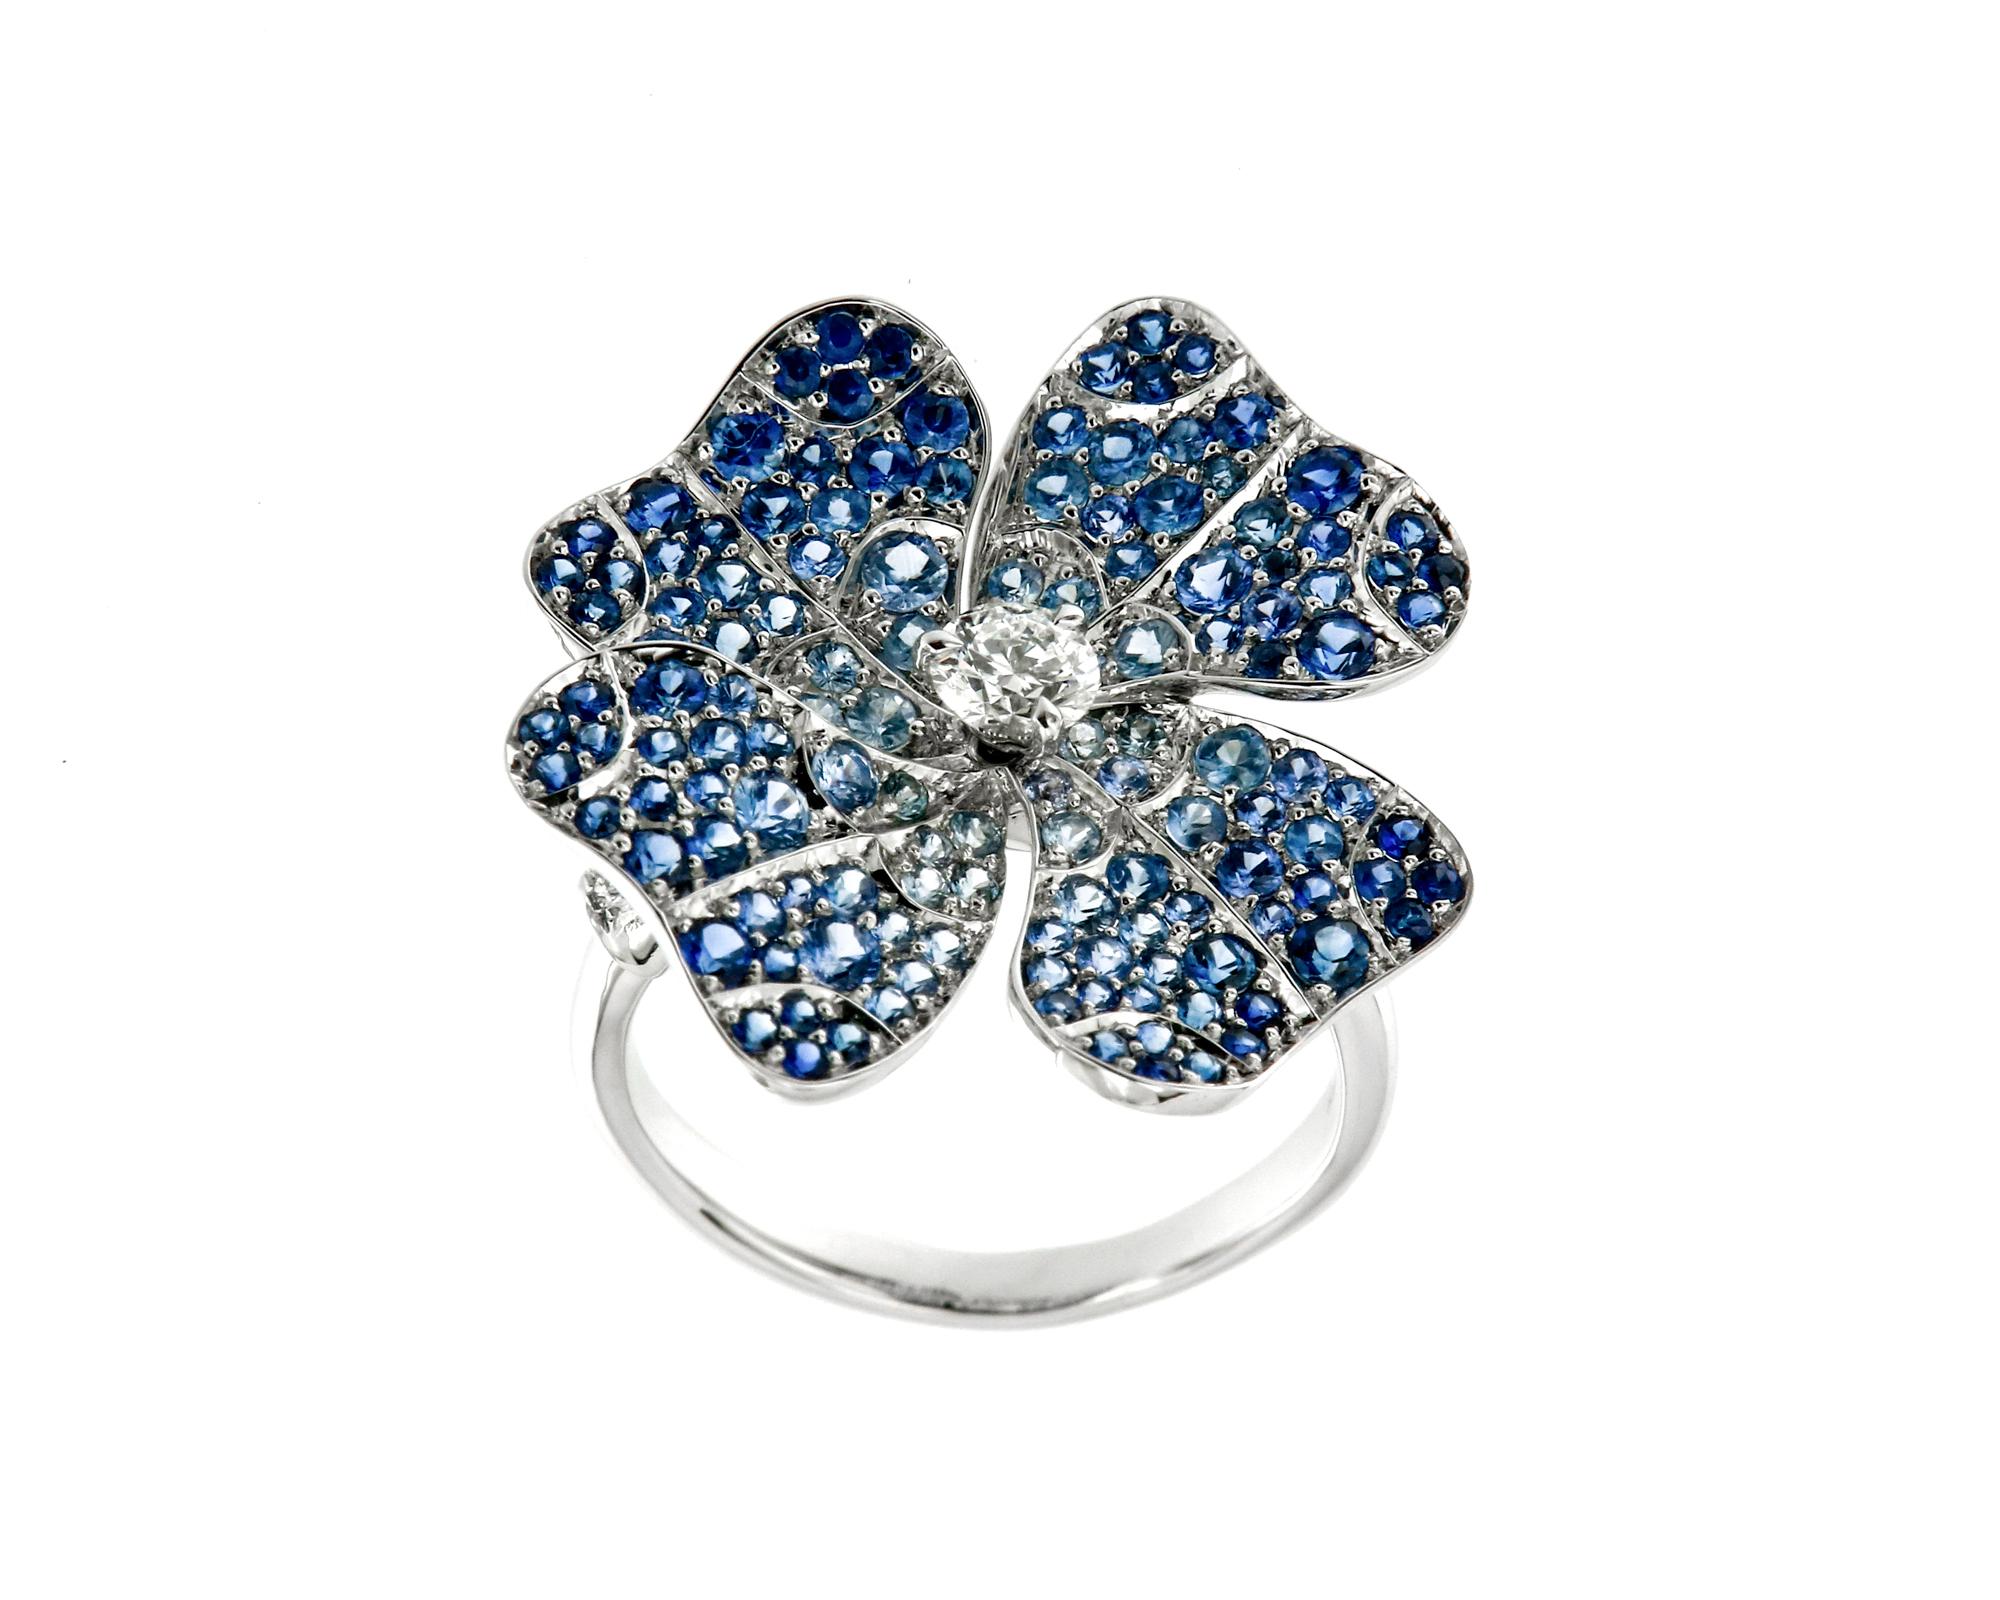 This beautiful Clover Ring goes super well with any case of attire. The crisp Blue Sapphires are attractive and held back at the same time. If it is a Dinnerparty or just picking up the kids from school - the ring fits any  occasion, as every